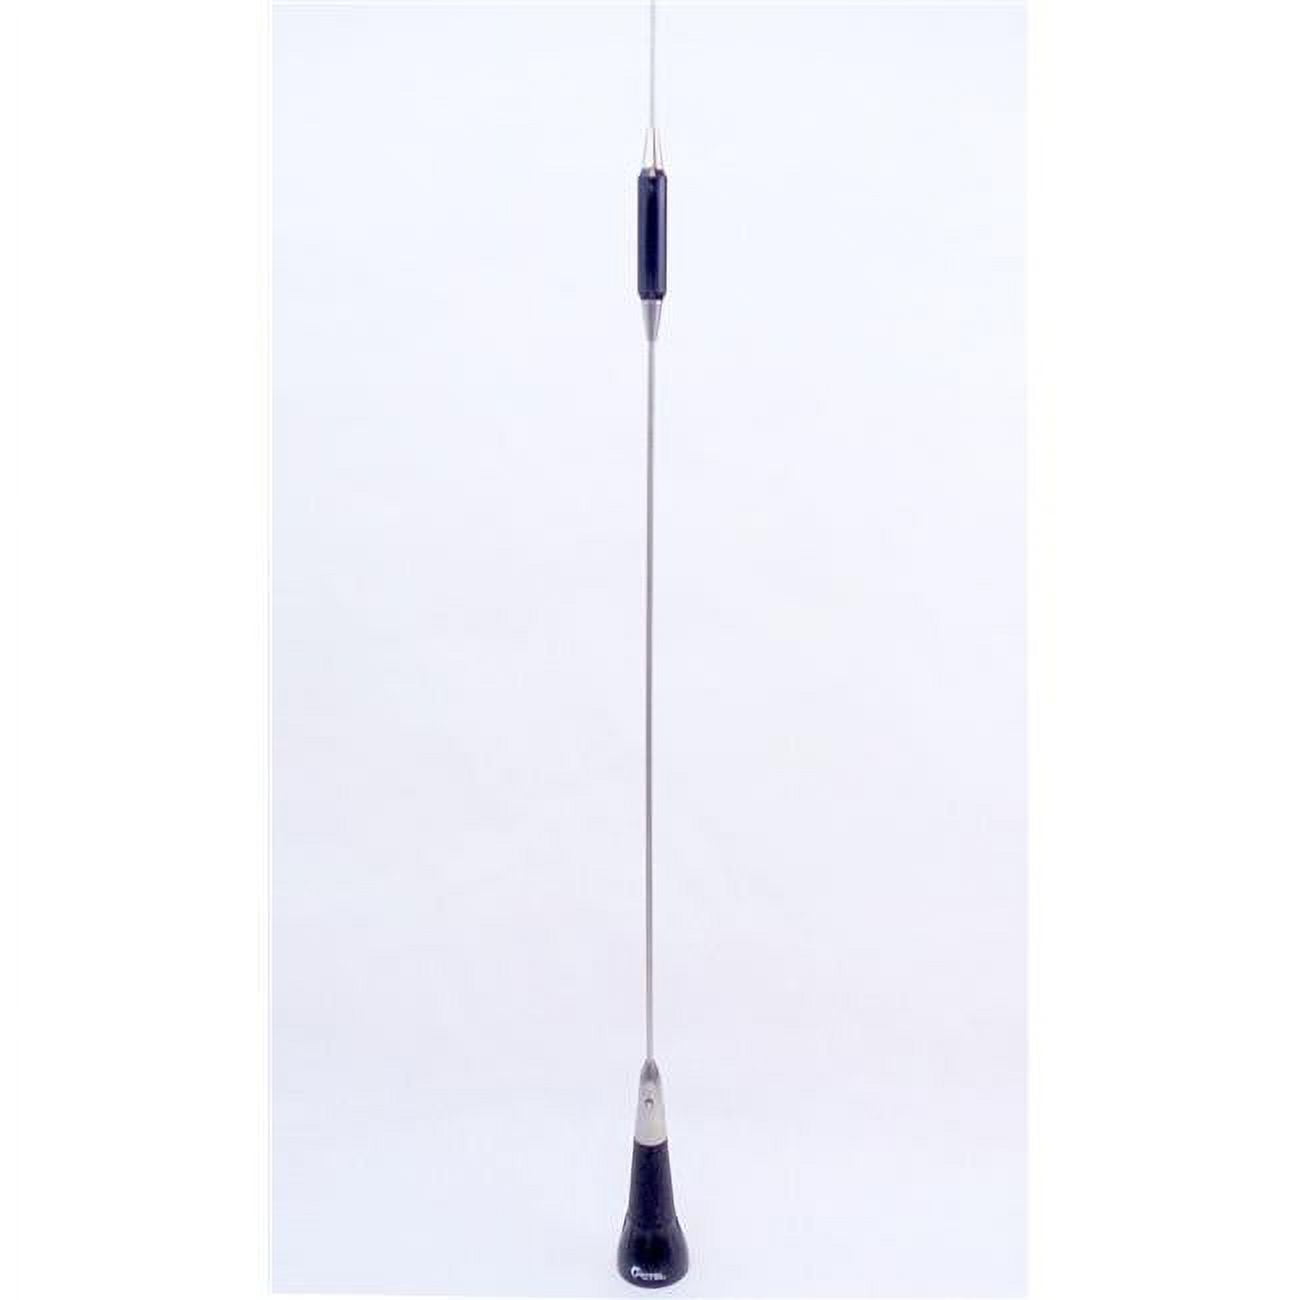 Picture of PCTEL-Maxrad ASP76551 38 & 0.57 in. Tall 445-470MHz 5dB Gain Nmo Base Mosaic Mobile Antenna